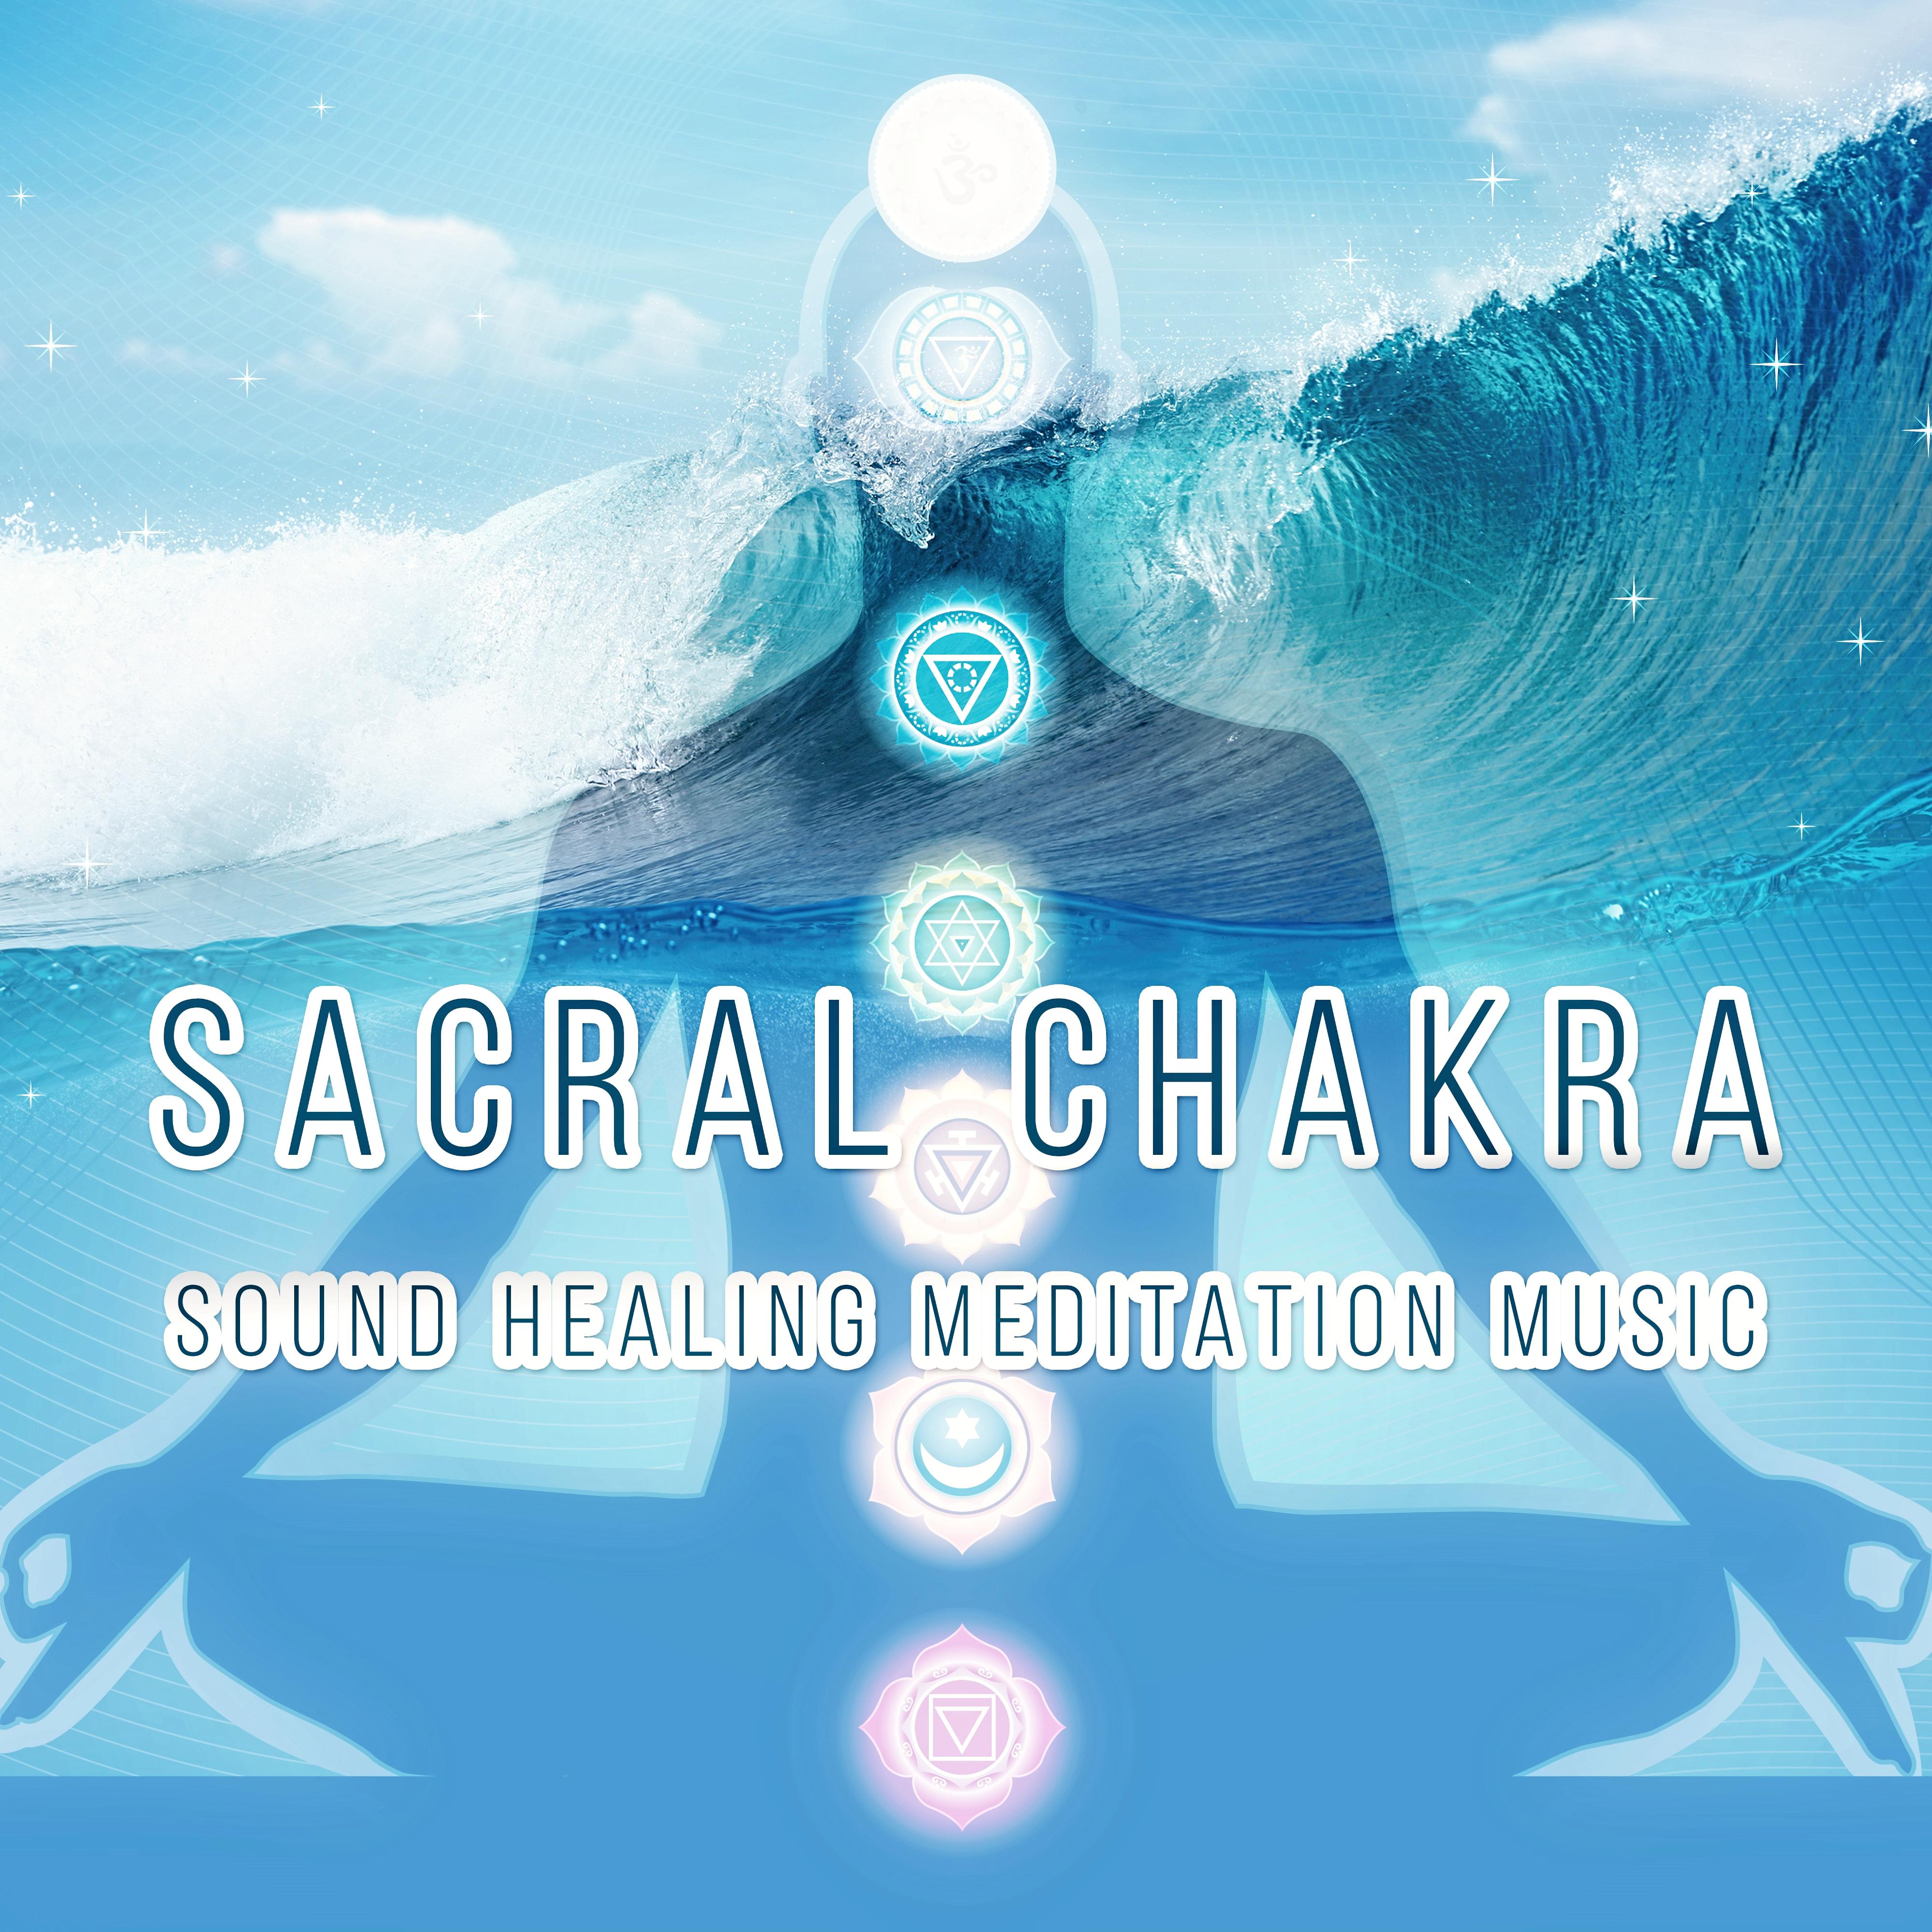 Sacral Chakra - Sound Healing Meditation Music Therapy for Relaxation, Pure Yoga with Background Music Ocean & Nature Sounds, Inner Balance, Restful Sleep, Reiki Healing